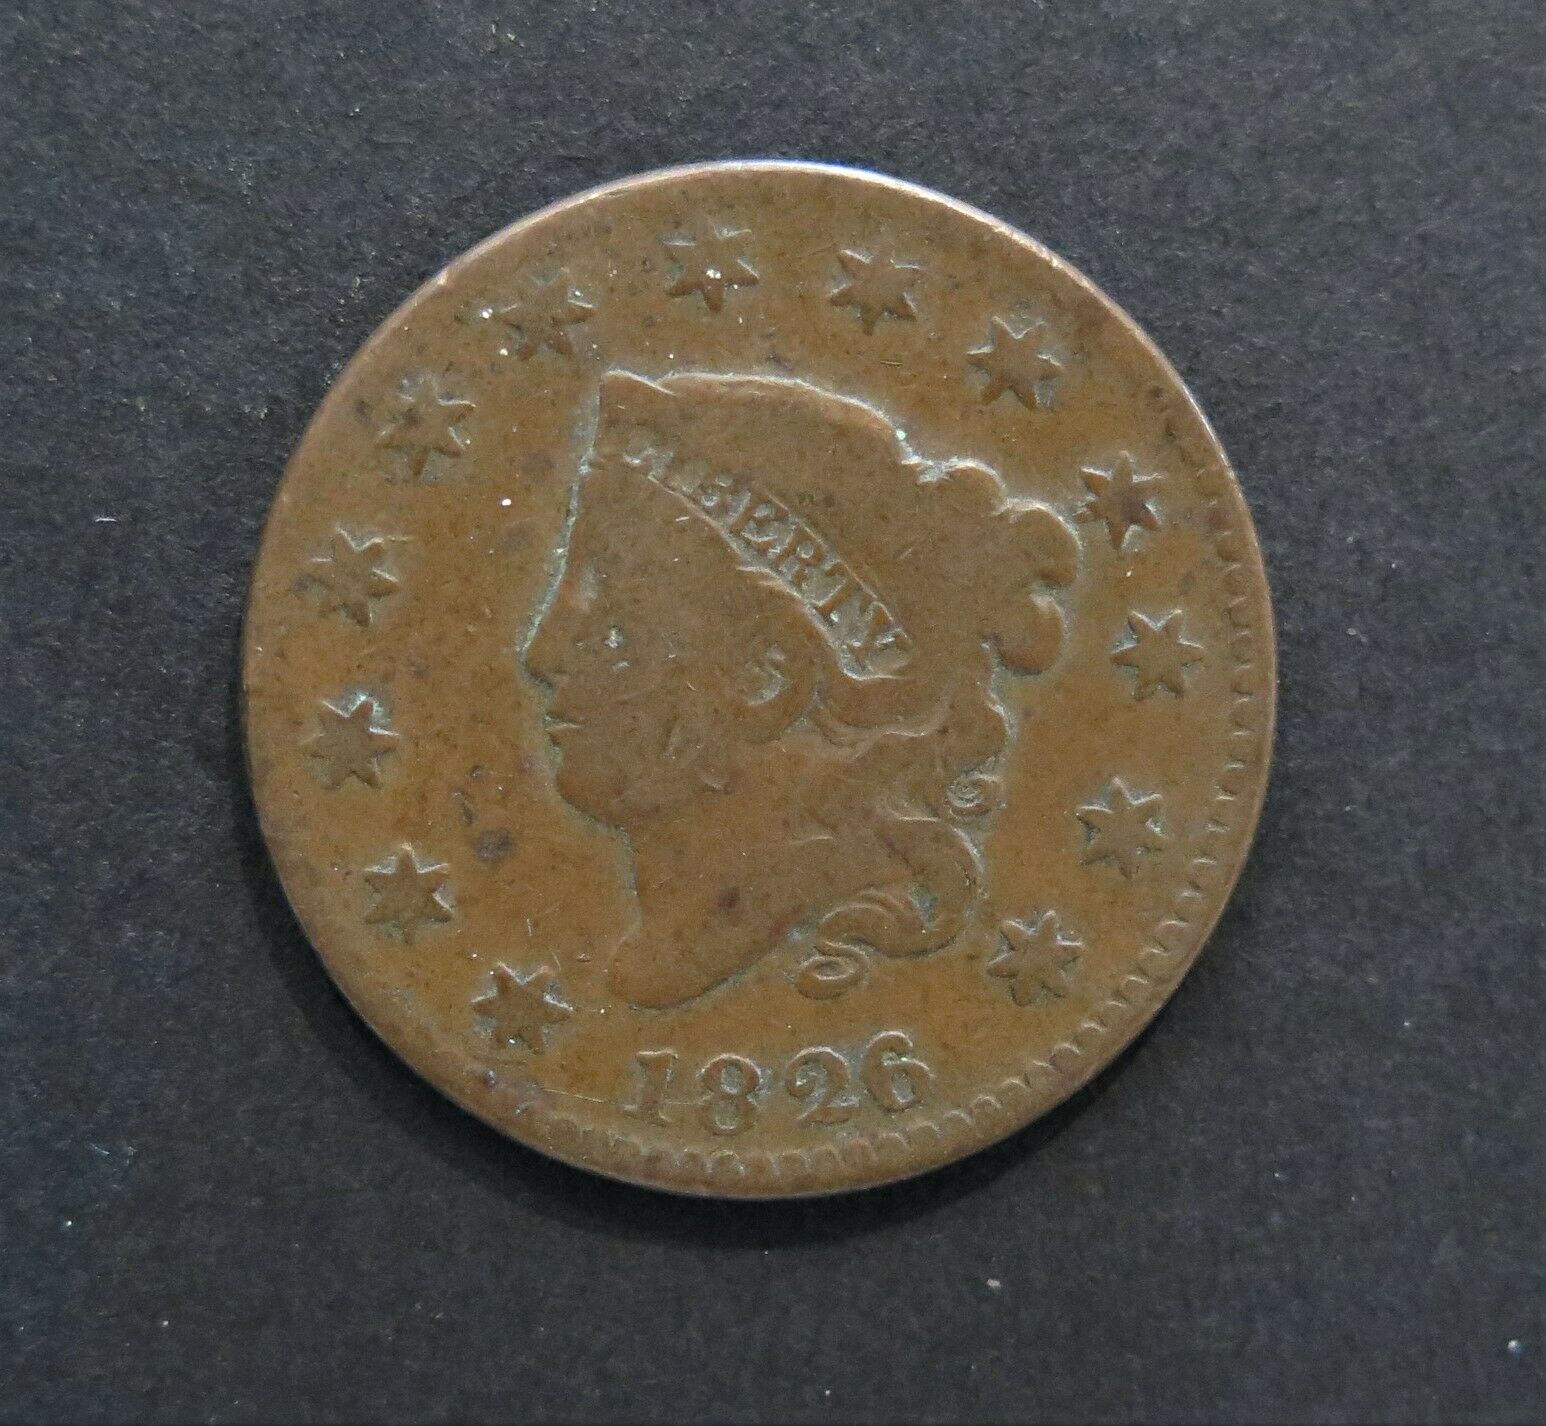 1826/5 large cent for sale Sold | Coin Talk